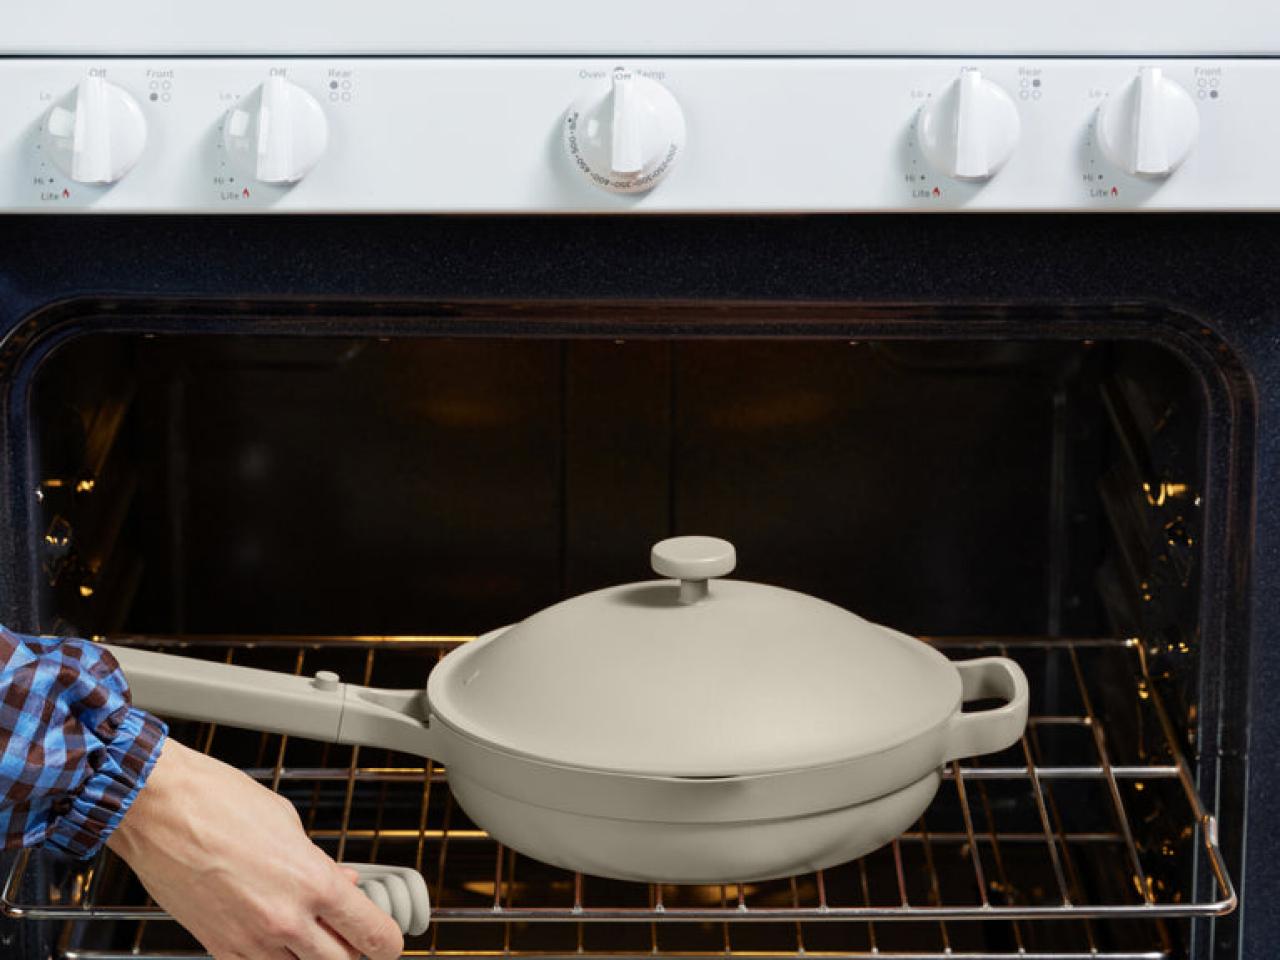 The Always Pan From Our Place Is Designed to Replace All of Your